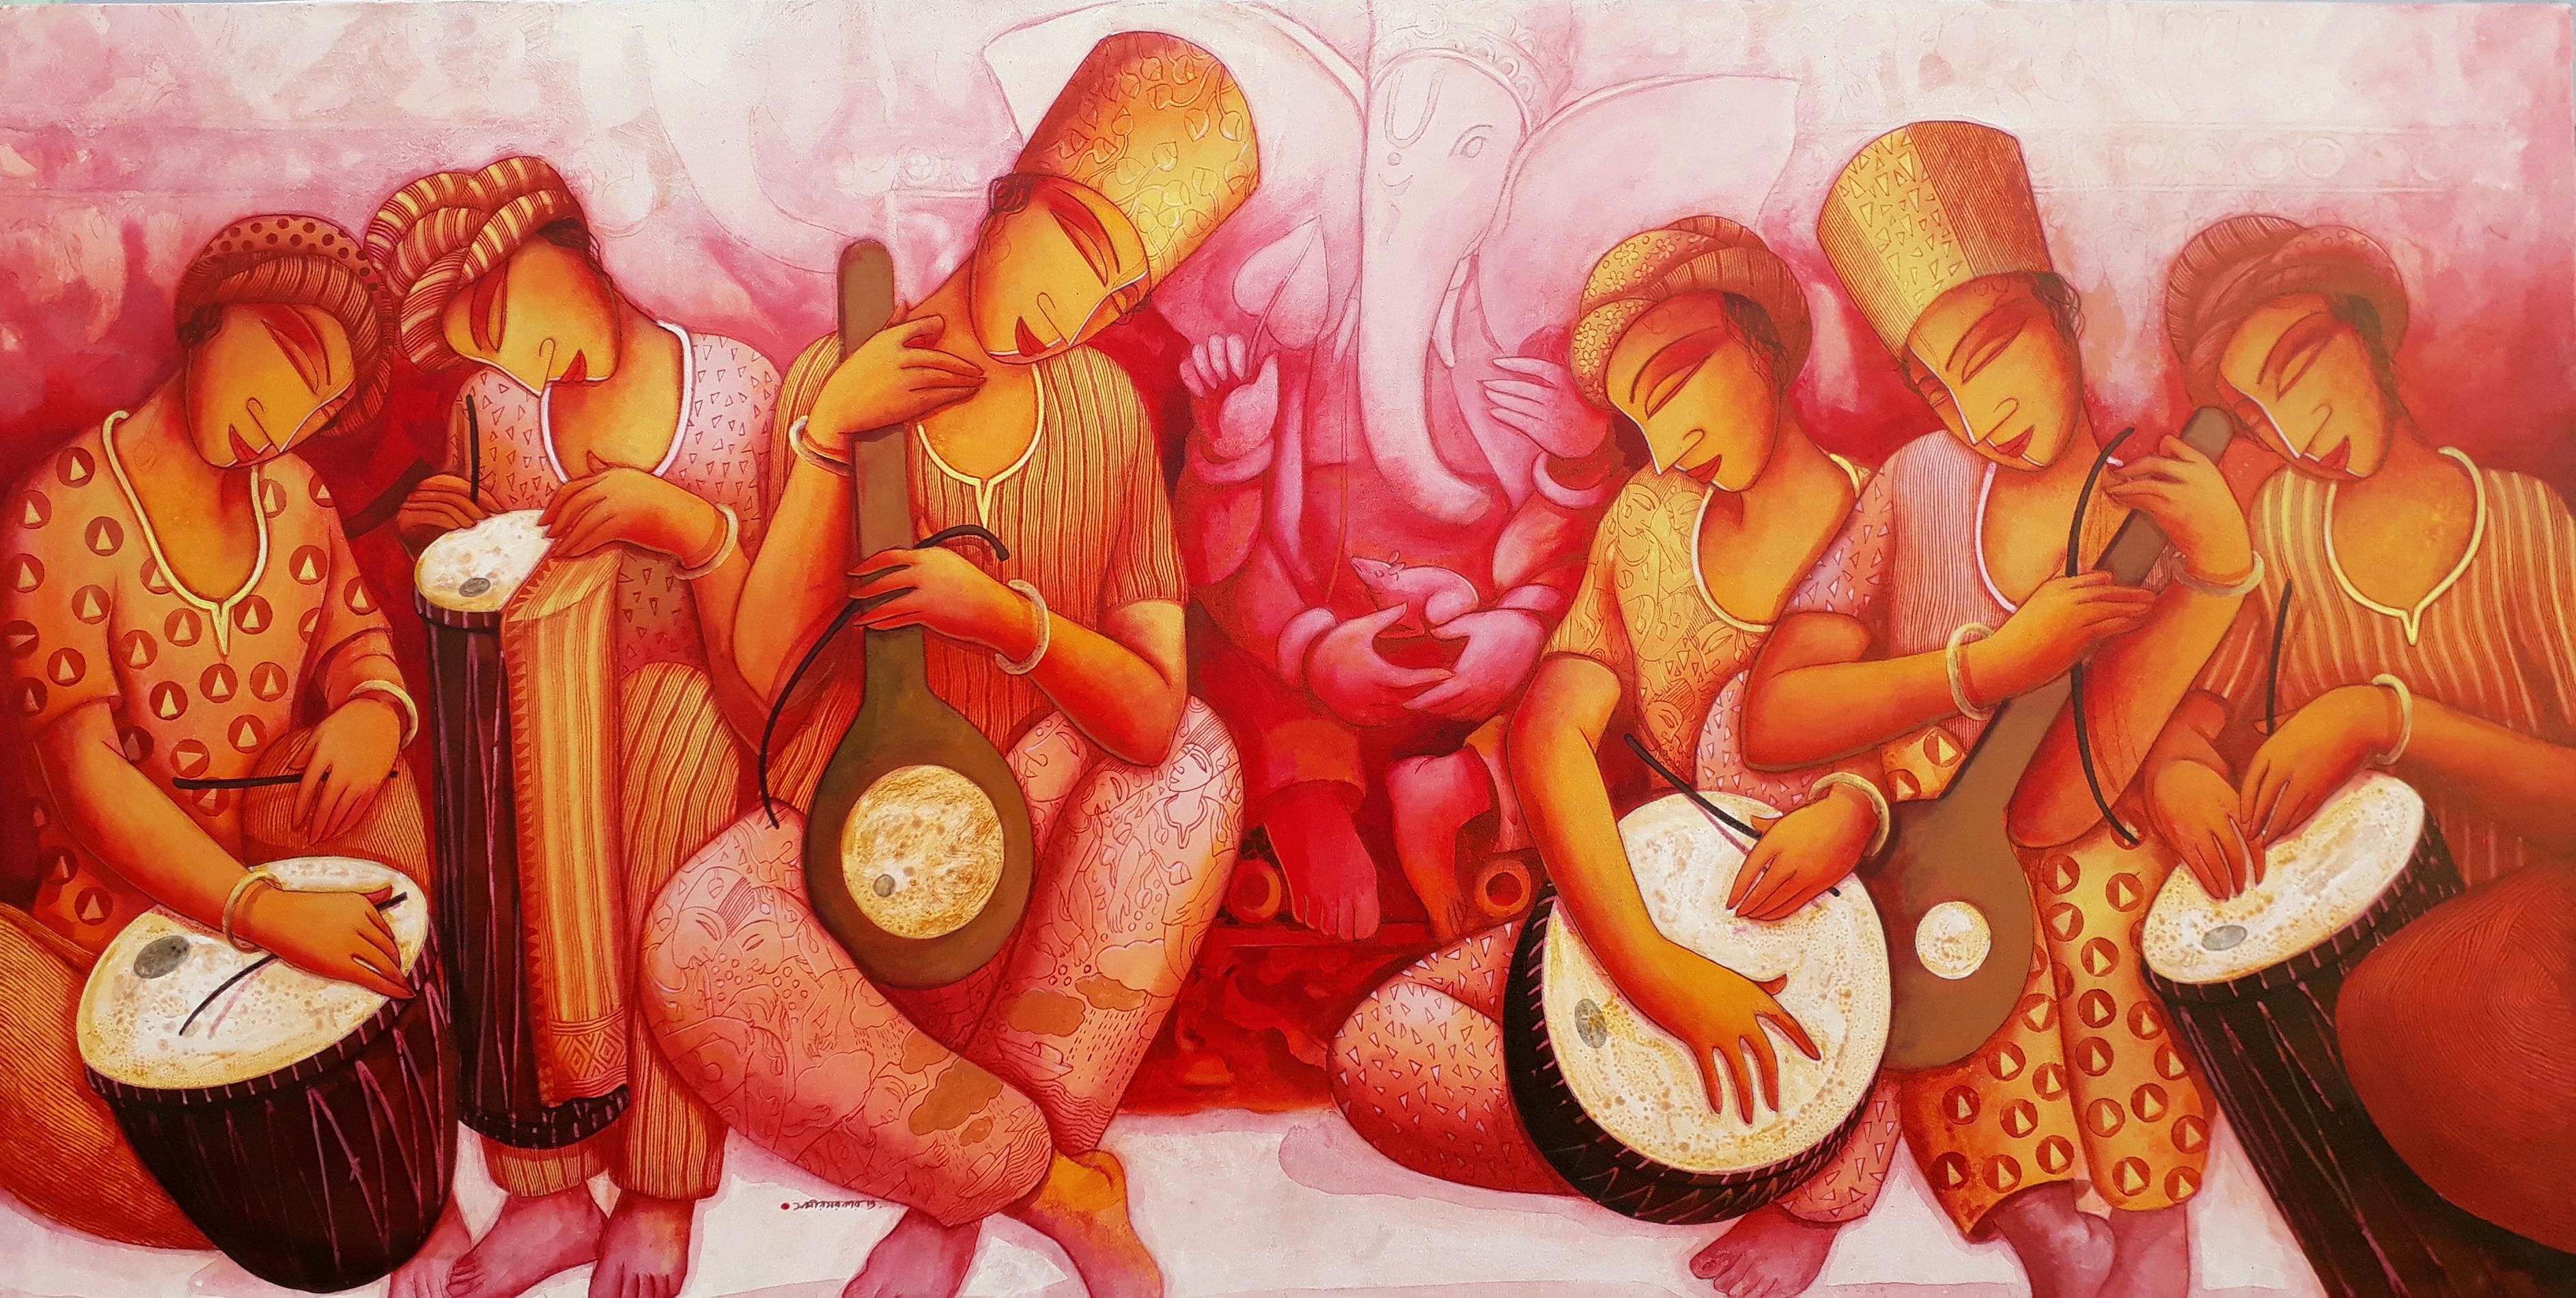 Musicians, Acrylic on Canvas, Red, Yellow, Pink by Contemporary Artist"In Stock"